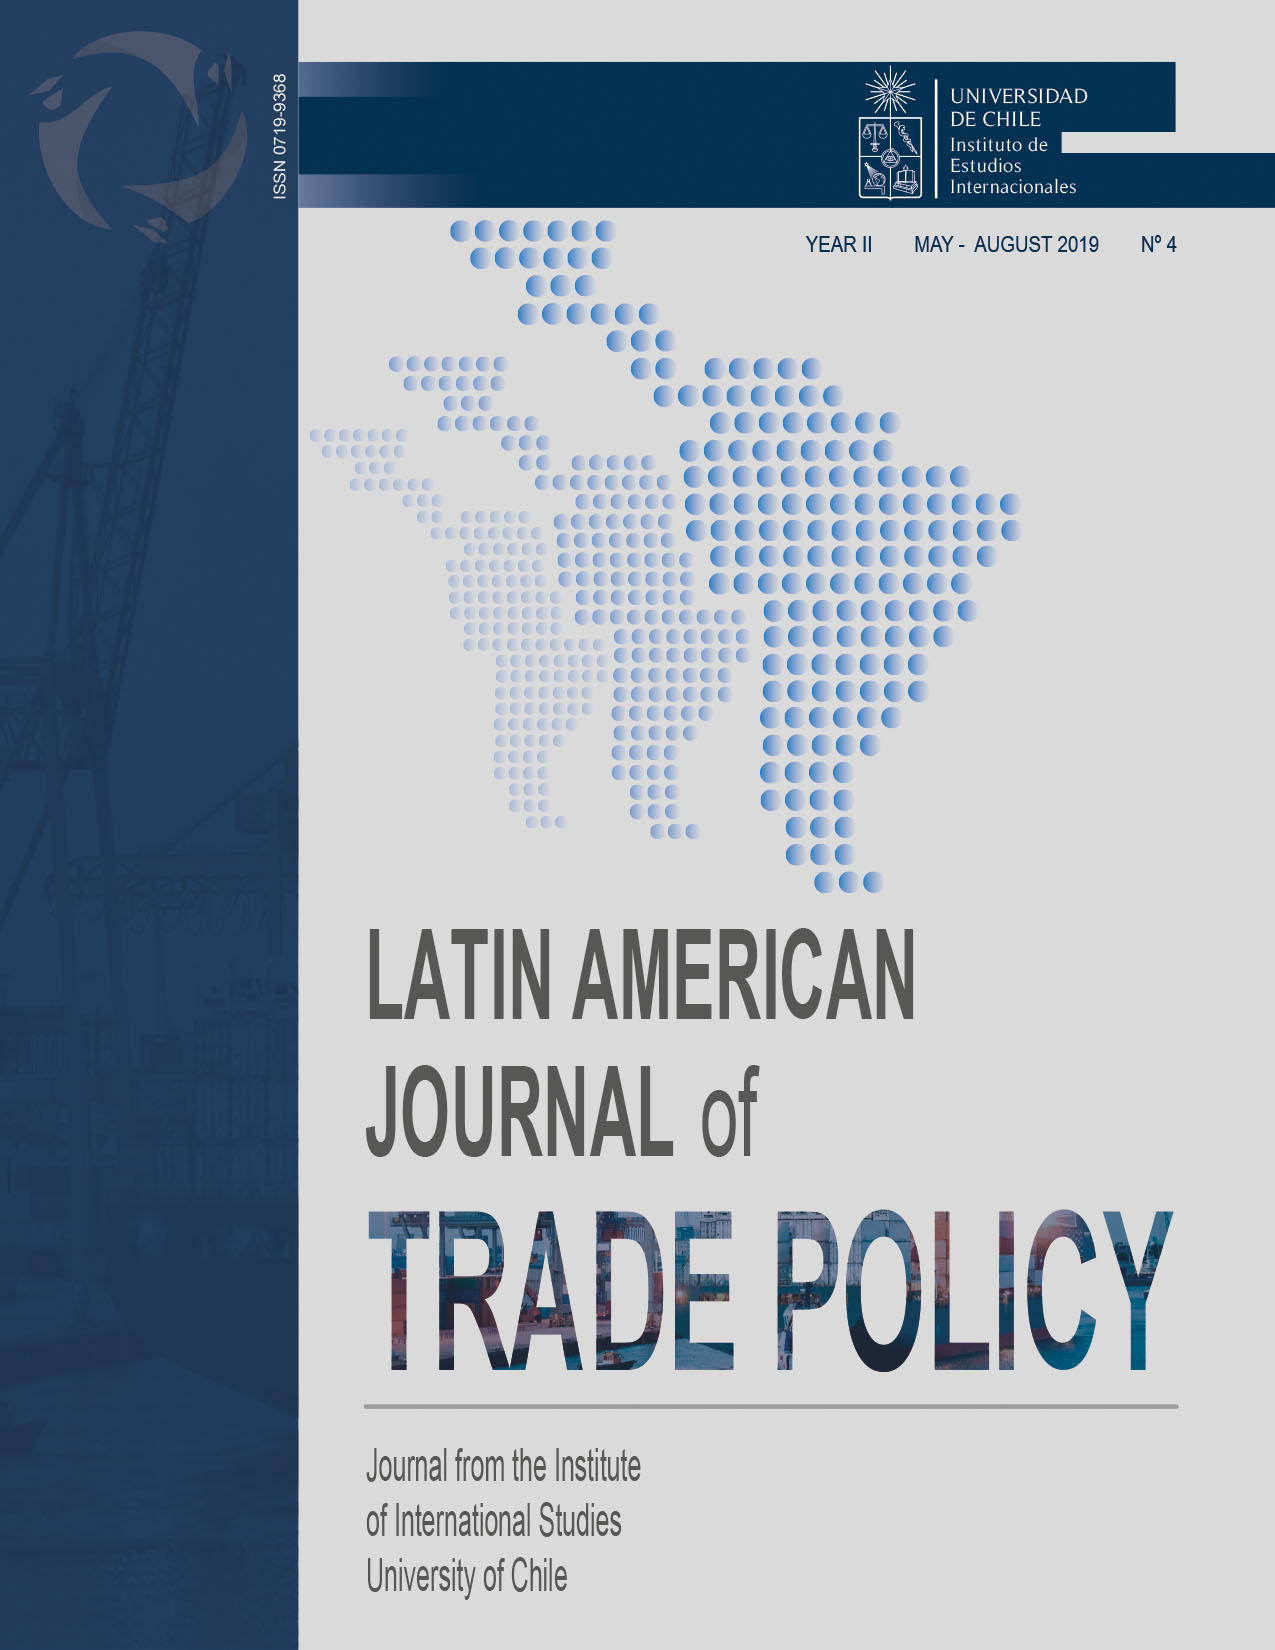 							View Vol. 2 No. 4 (2019): Latin American Journal of Trade Policy
						